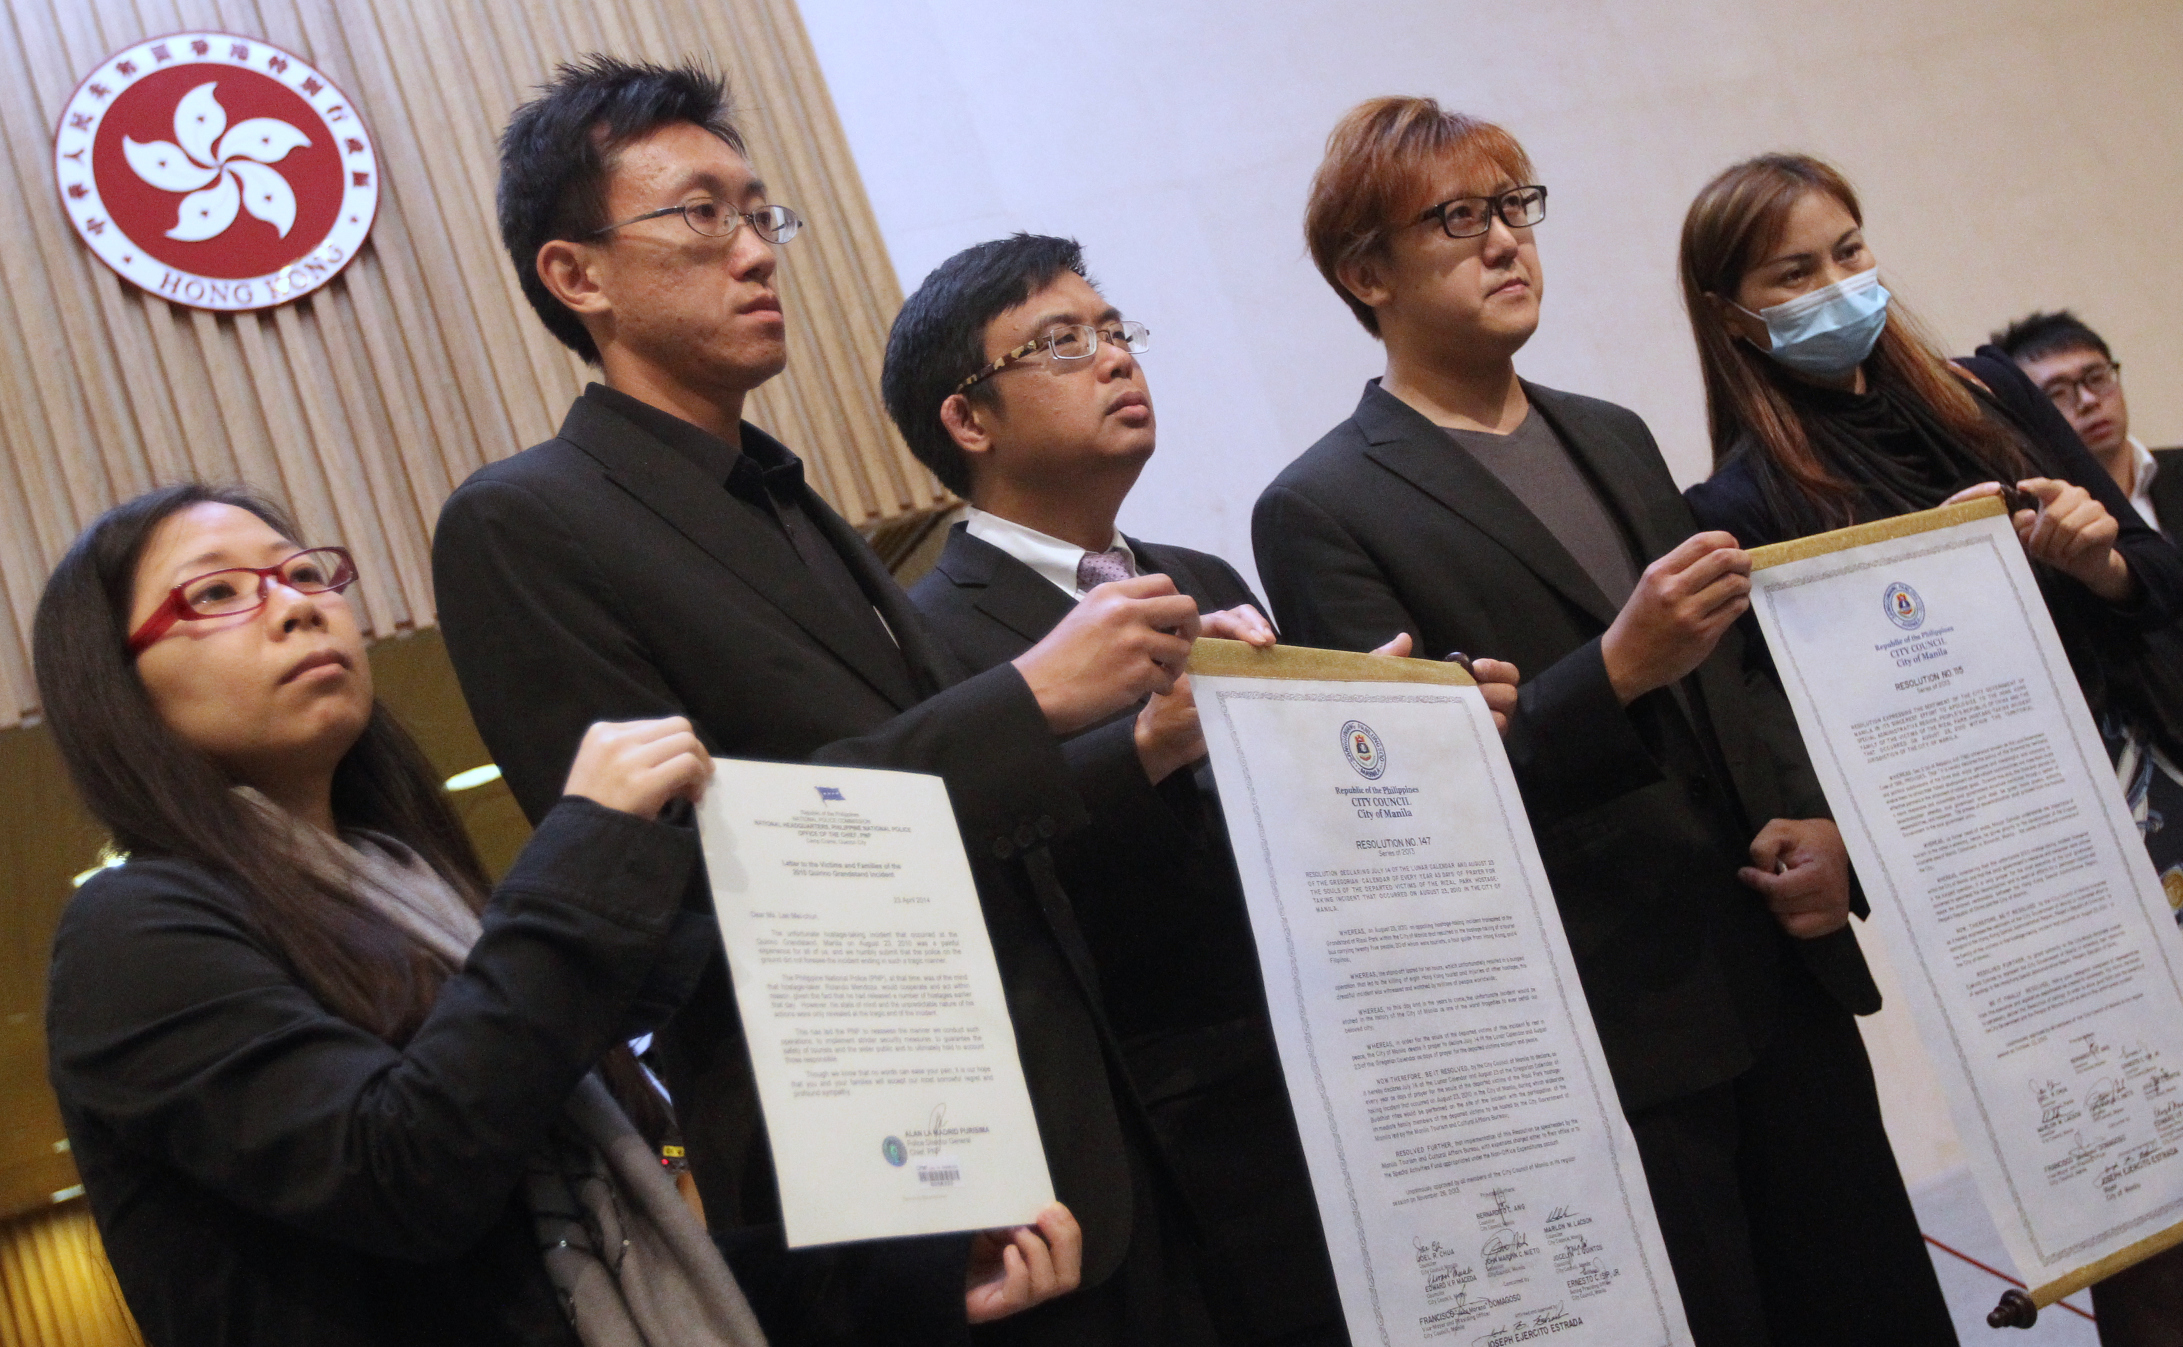 Survivor Lee Ying-chuen, deceased tour guide Masa Tse Ting-chunn's brother Tse Chi-hang, lawmaker James To Kun-sun, Tse's older brother Tse Chi-kin and survivor Yik Siu-ling with the resolutions from Manila city council and the letter from the police chief. Photo: Felix Wong